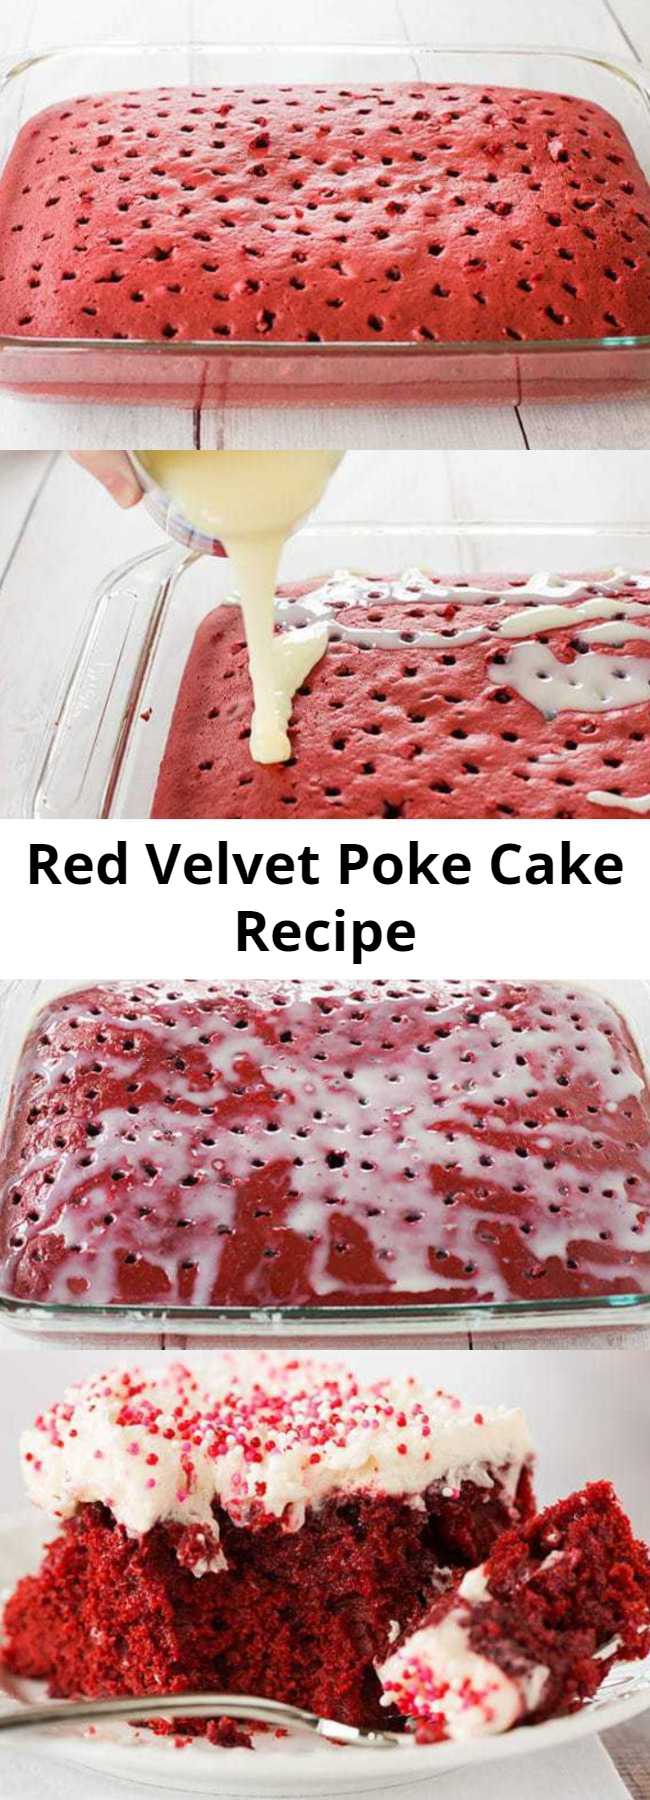 Red Velvet Poke Cake Recipe - Red velvet cake is infused with sweetened condensed milk and topped with the best cream cheese frosting. A must for Valentine's Day!